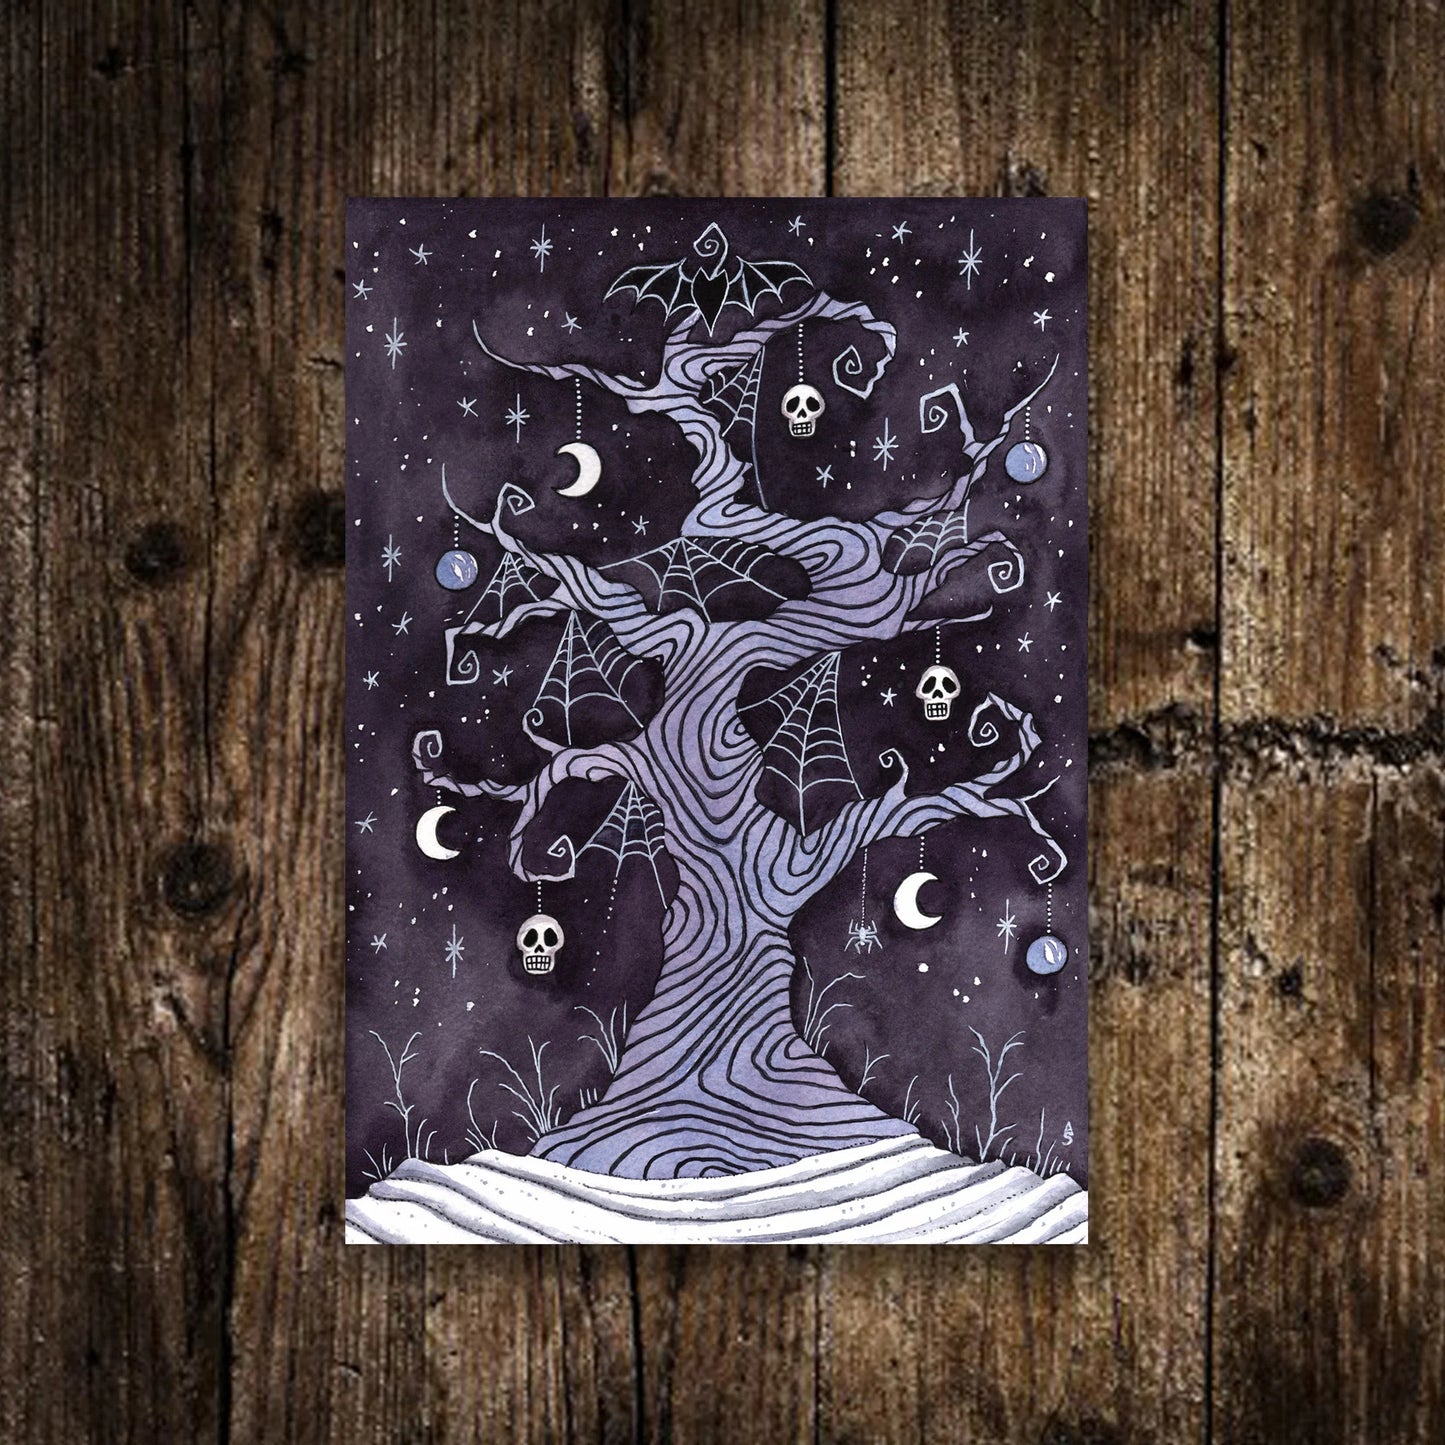 Mini A6 Lonely Forgotten Tree Print - Small Gothic Winter Illustration - Watercolour Creepy Twisted Tree Postcard - Spooky Christmas Tree